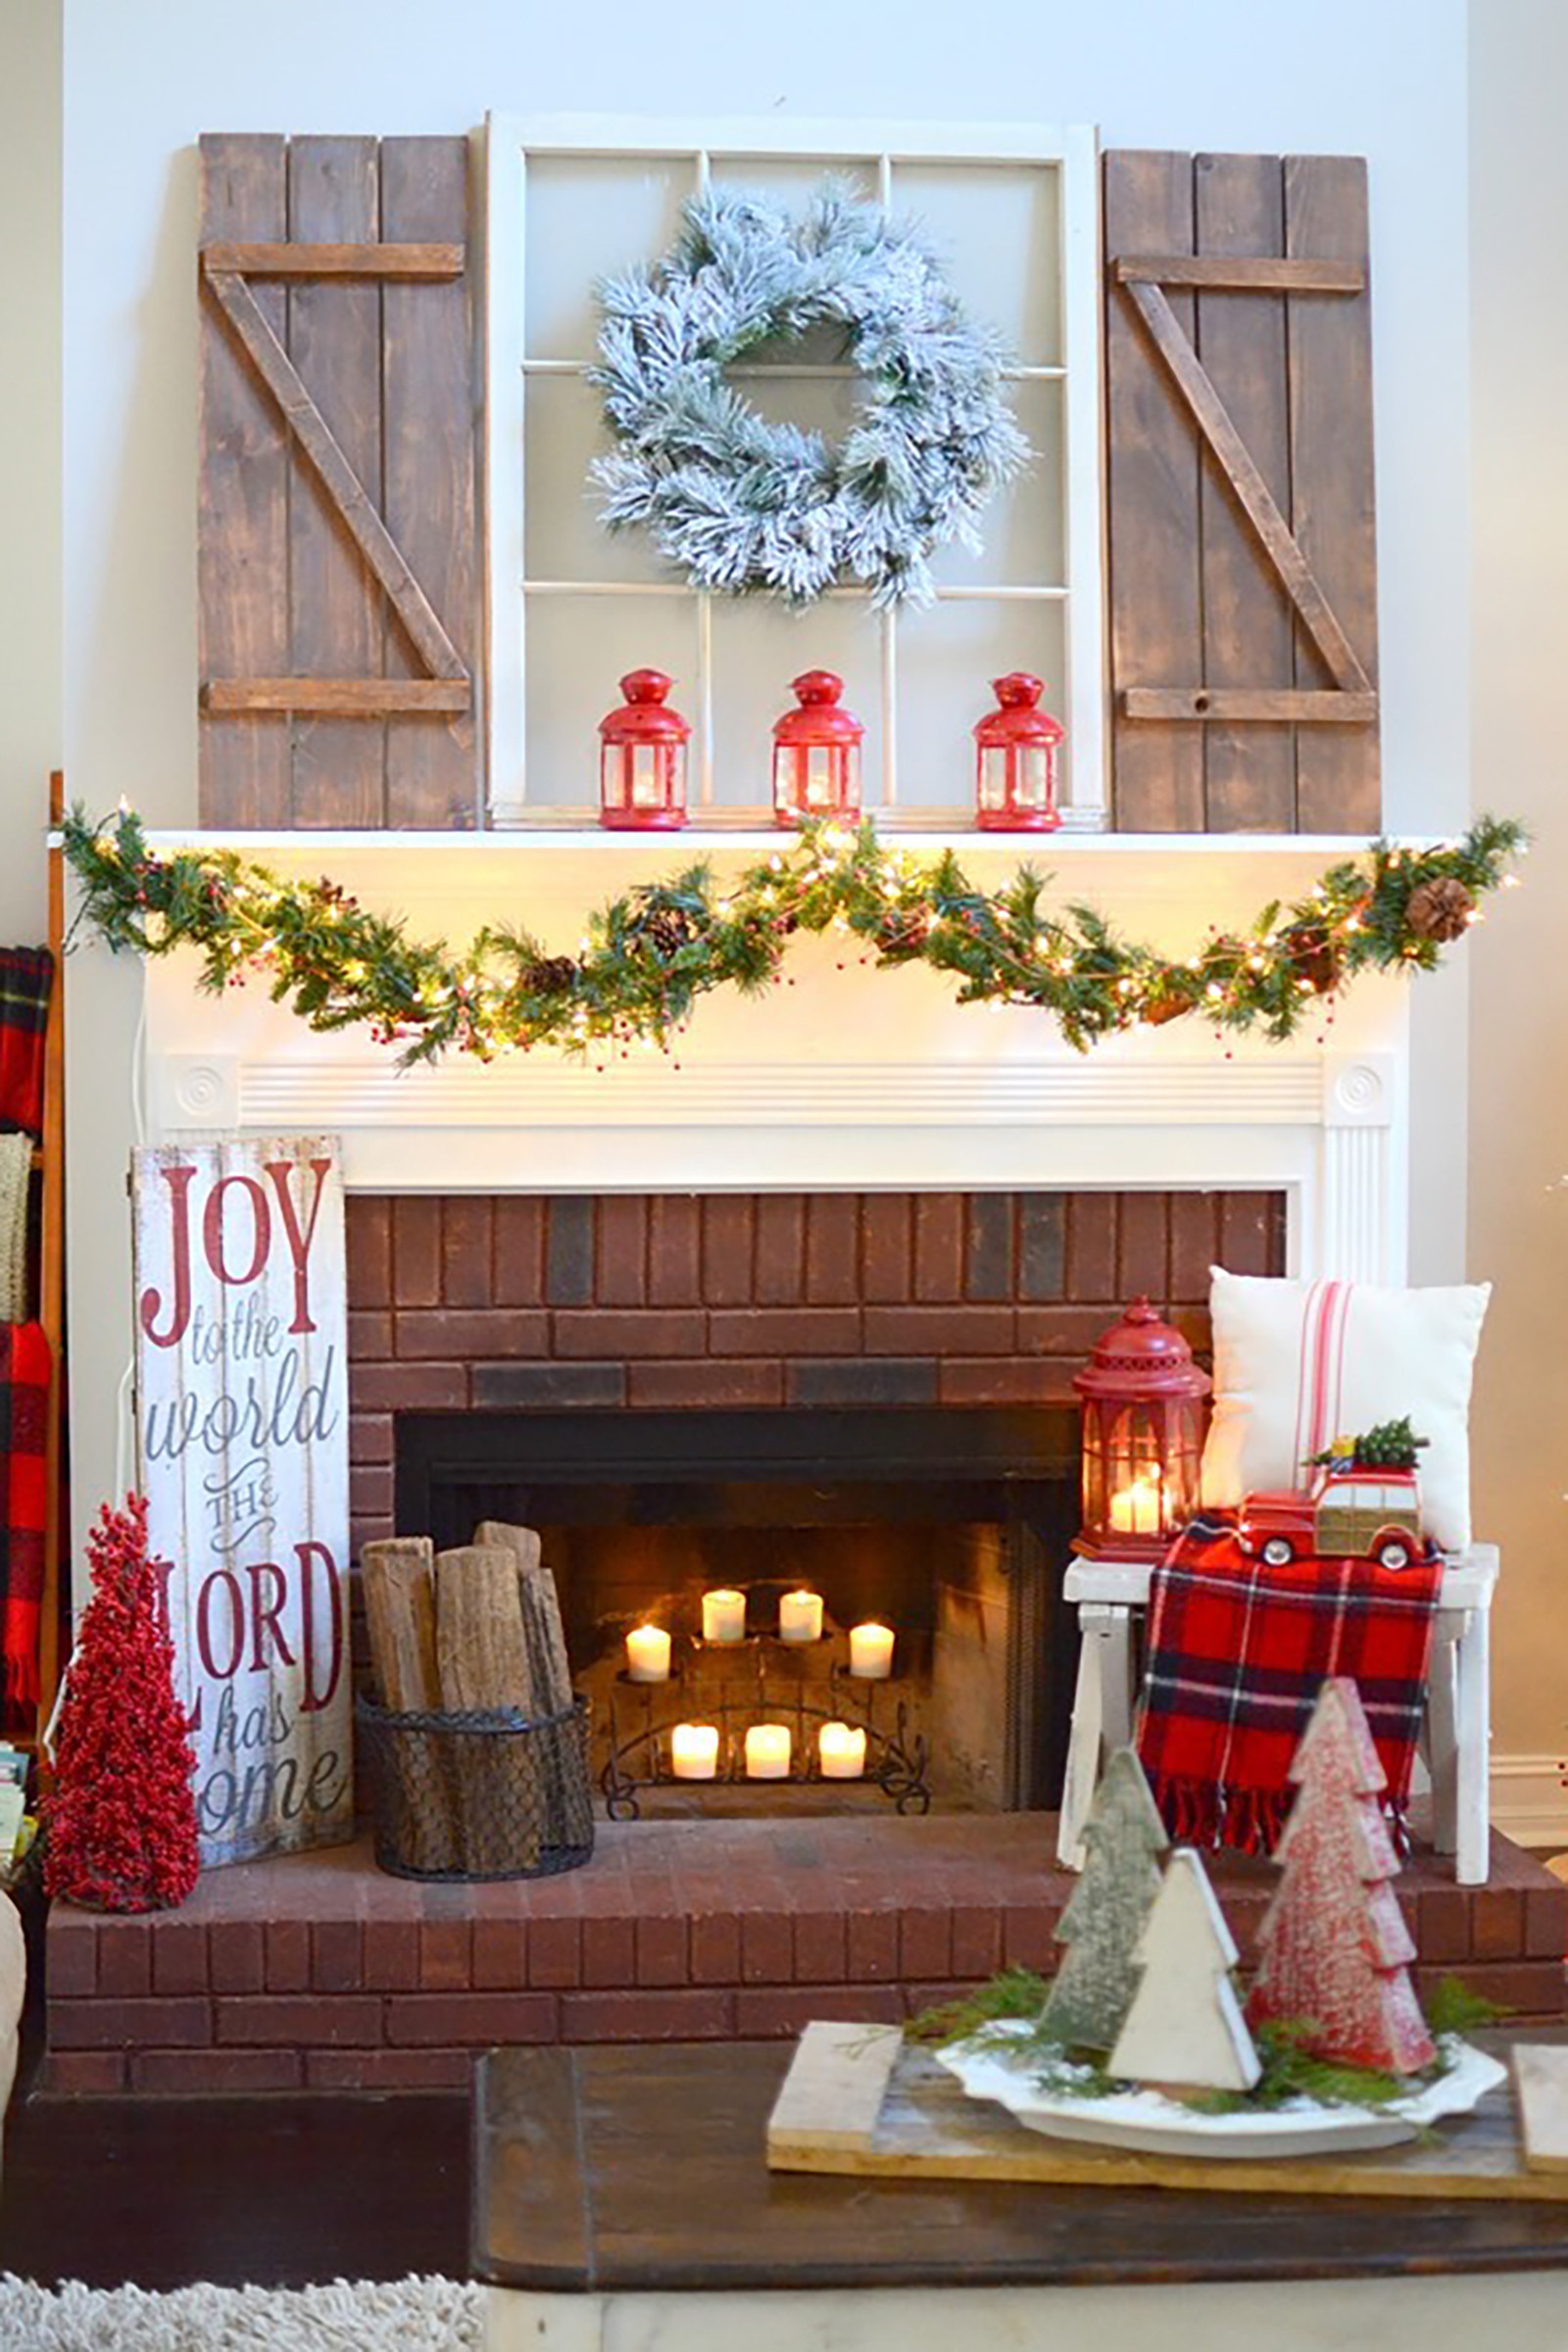 Fireplace Christmas Decorations
 35 Christmas Mantel Decorations Ideas for Holiday